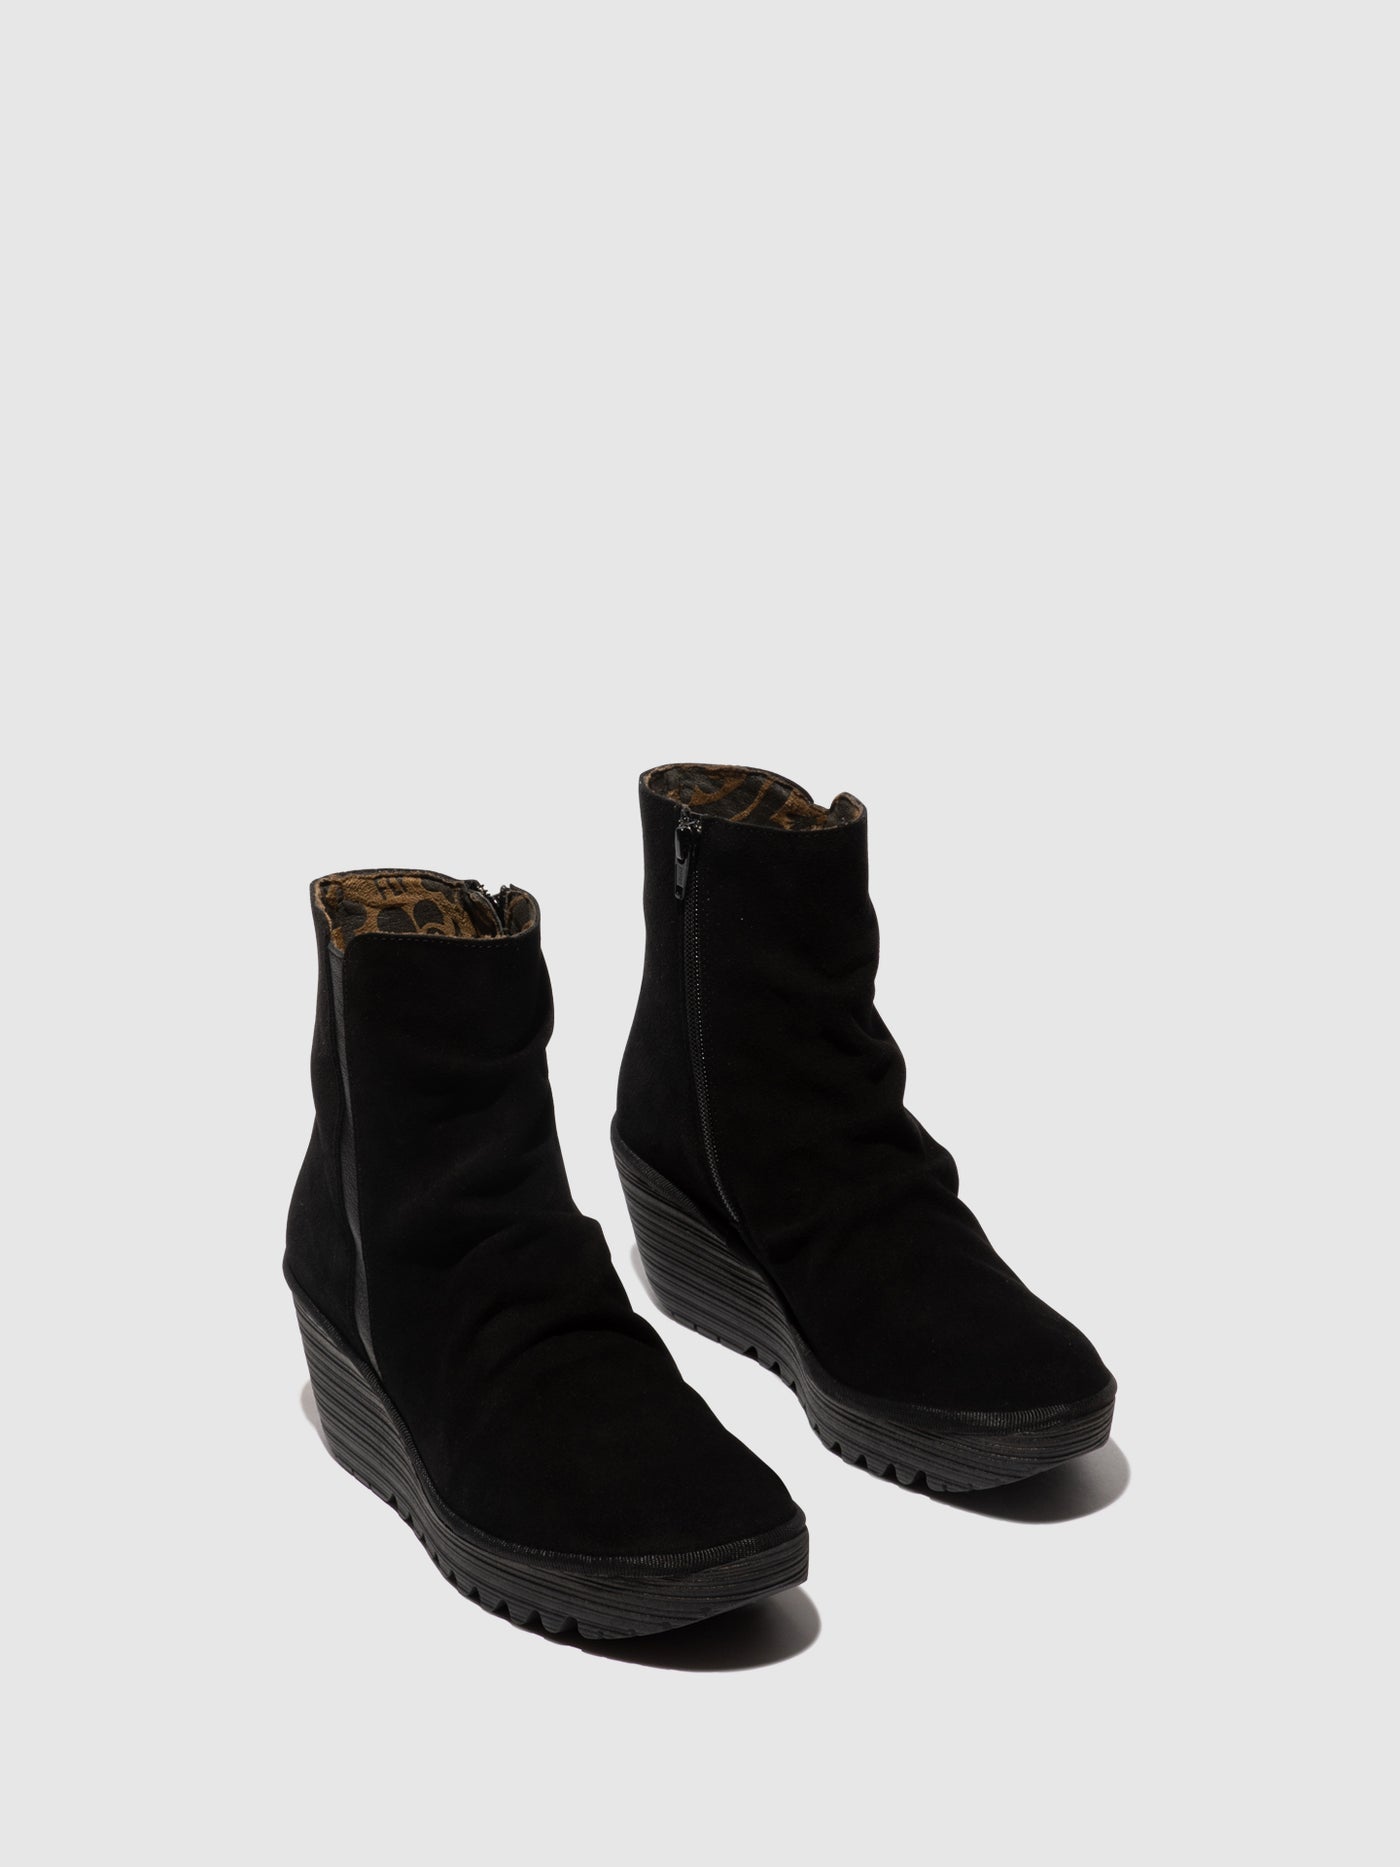 Zip Up Ankle Boots YOPA461FLY OIL SUEDE/MOUSSE BLACK